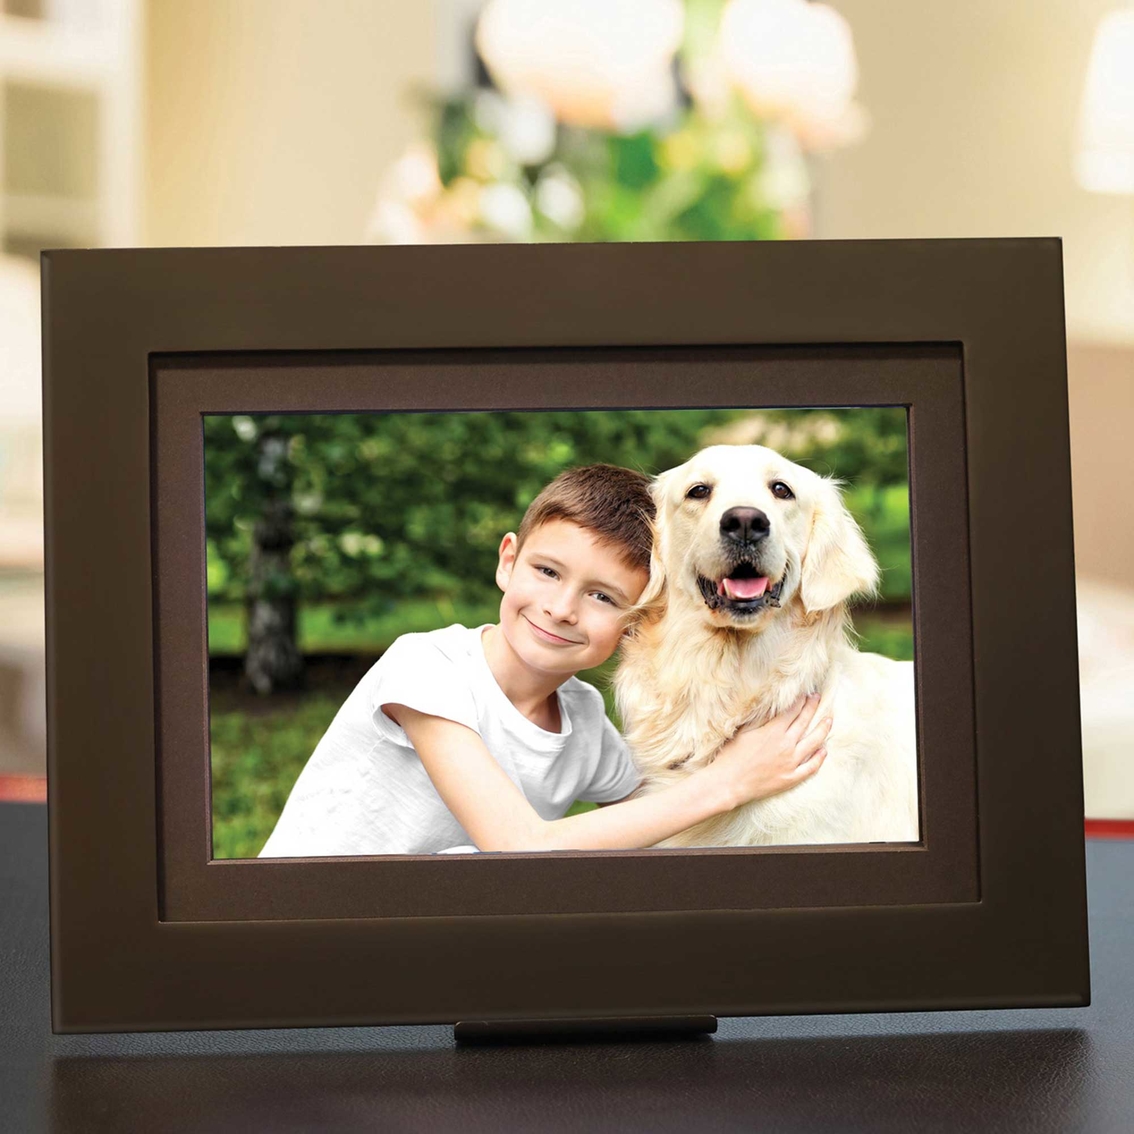 Brookstone Switchmate PhotoShare Friends and Family Cloud Frame 8 in. - Image 5 of 6